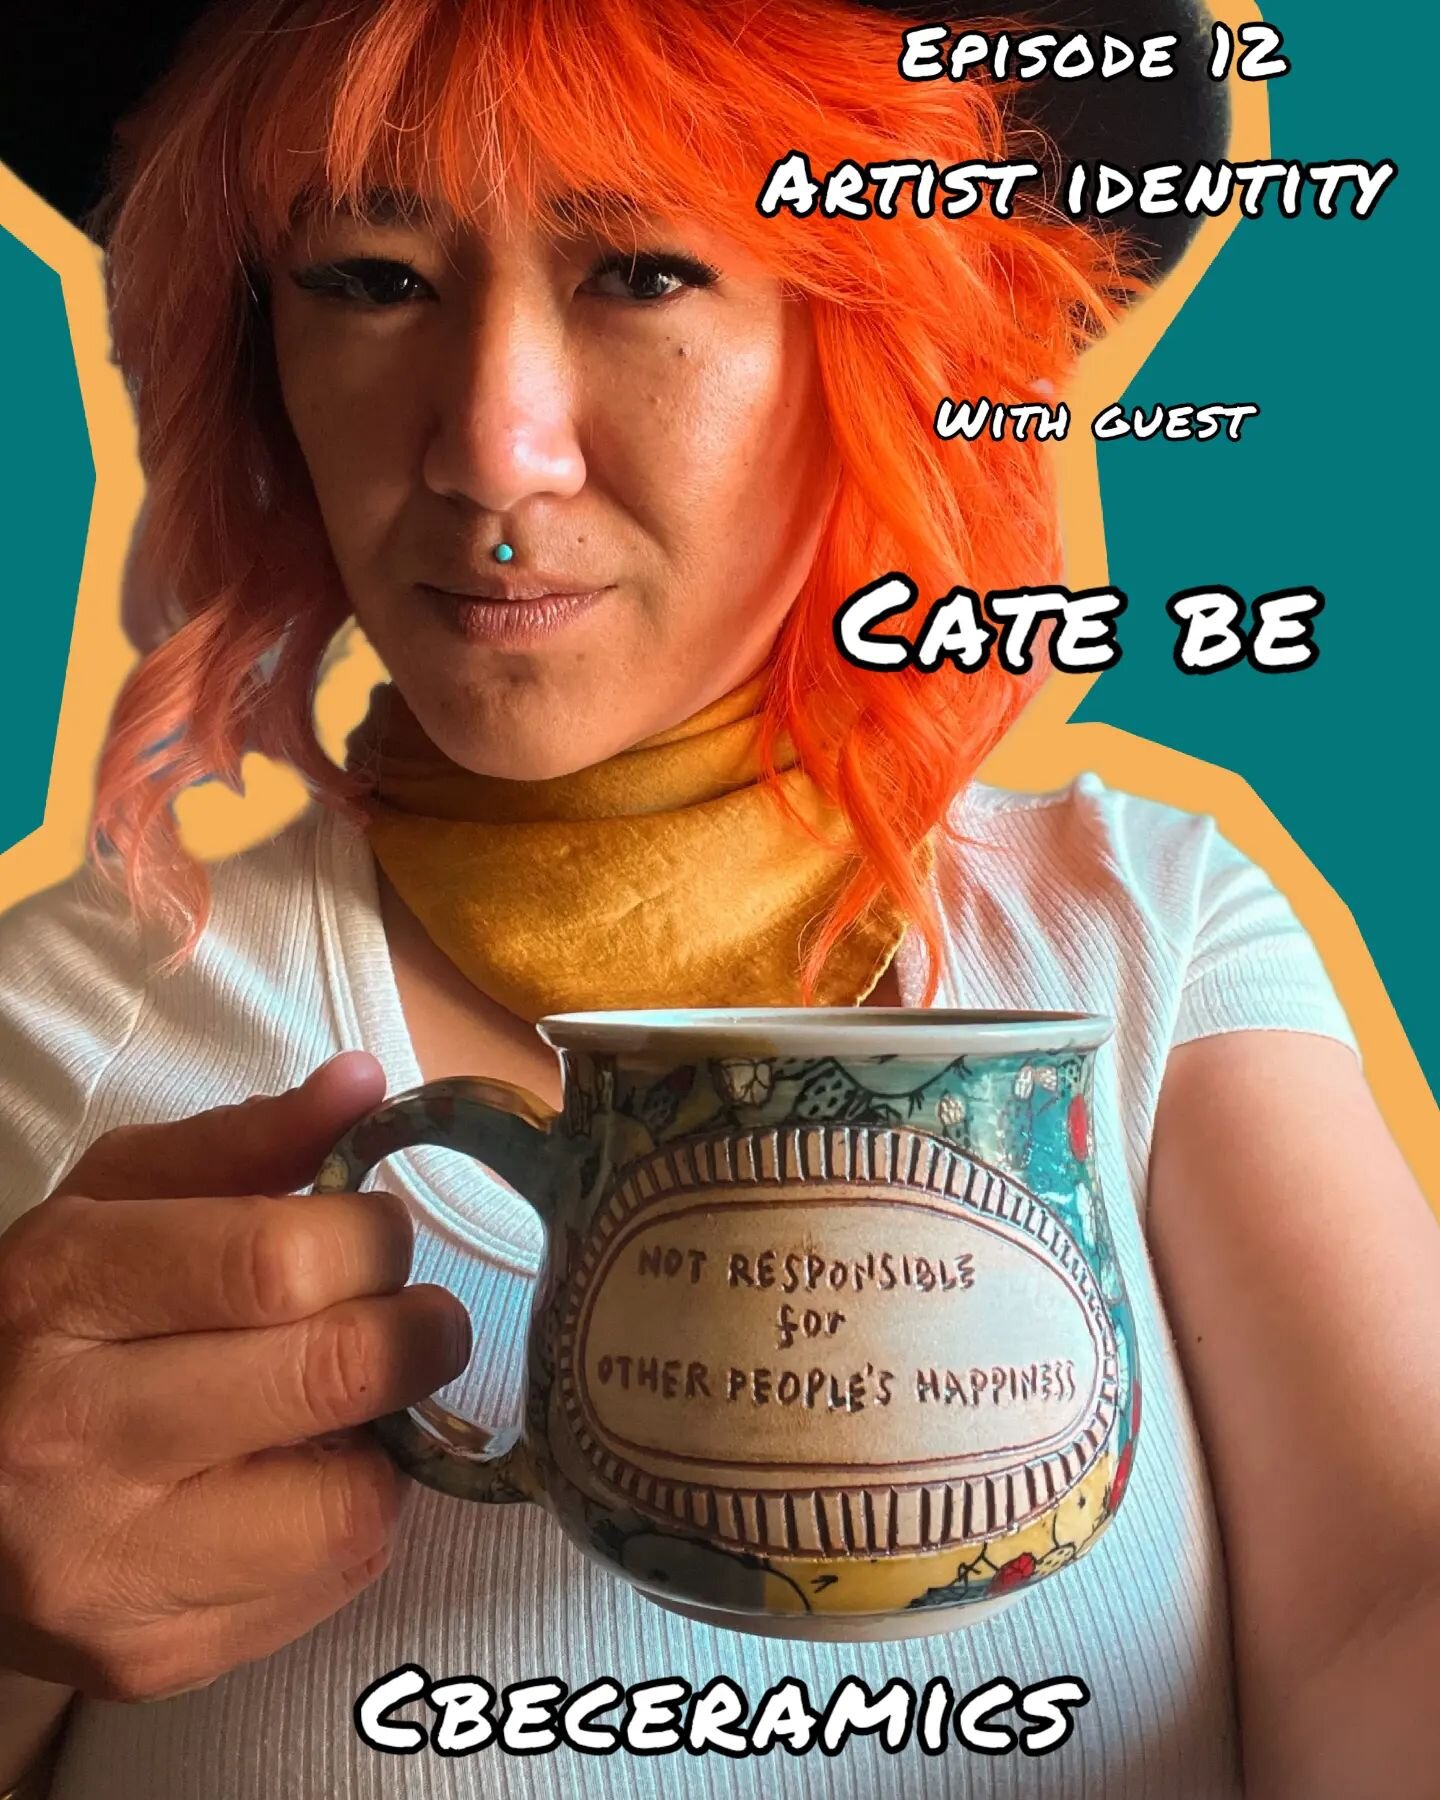 Another episode is live! 

On this episode I'm joined by fellow artist Cate Be @cbeceramics We chat about our artist identities, why we create and the intentions we want our art to have. 

Listen on Spotify or Anchor 

#ceramics #pottery #artist #art